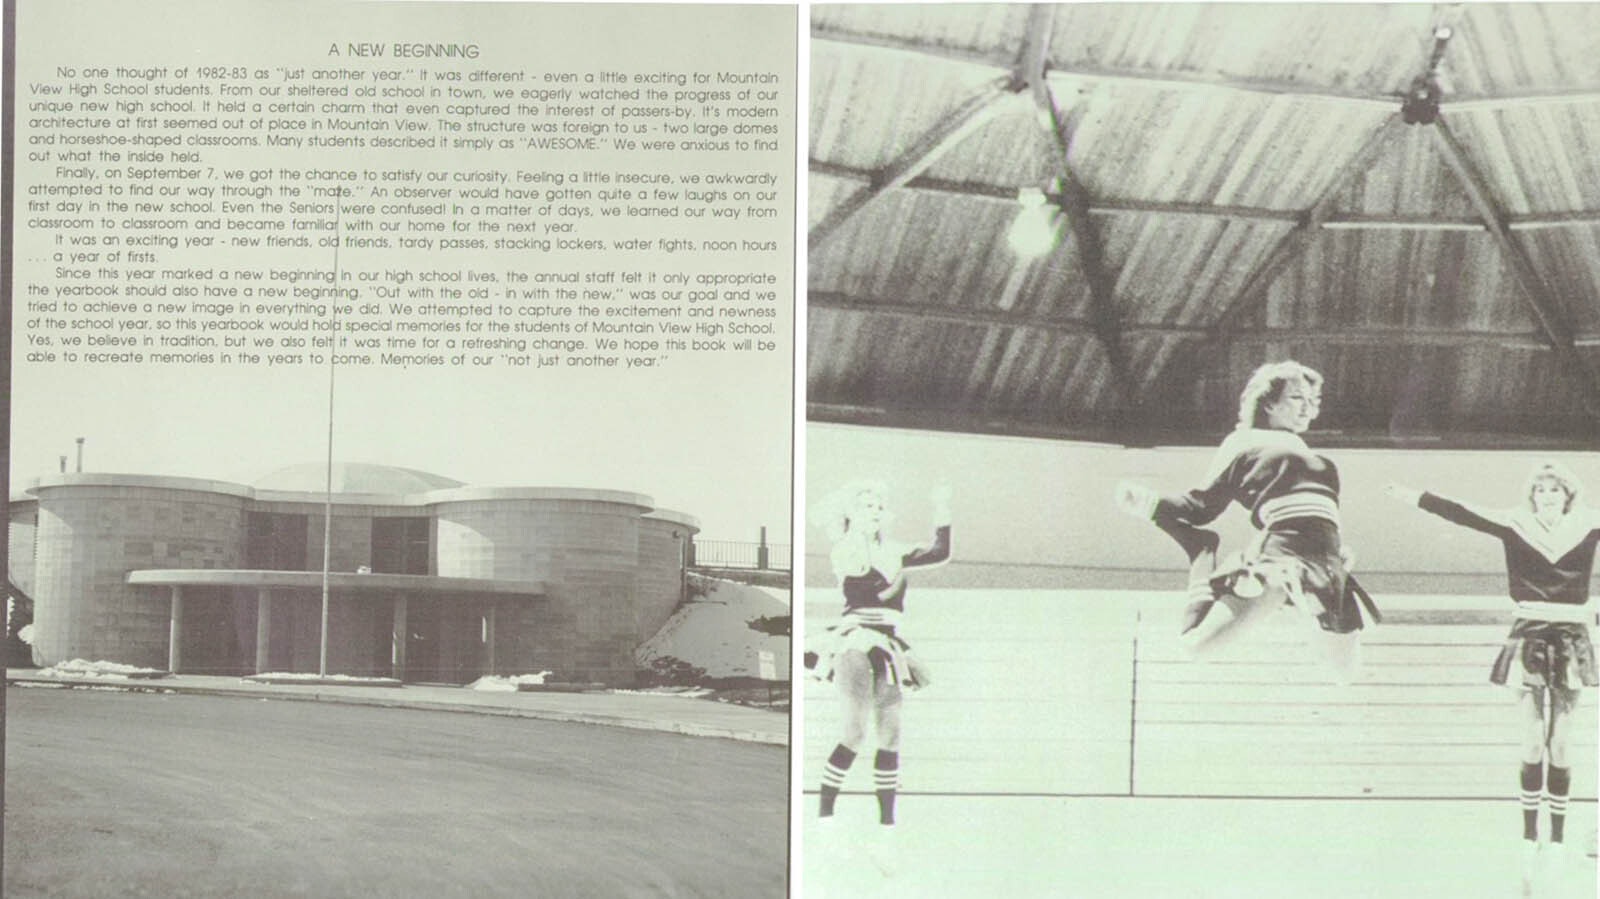 Left, lead page of the 1983 Mountain View High School yearbook, which mentions of the brand new school that opened Sept. 7, 1983. Right, cheerleaders do their thing in a brand new gym that would one day become know as The Dome.